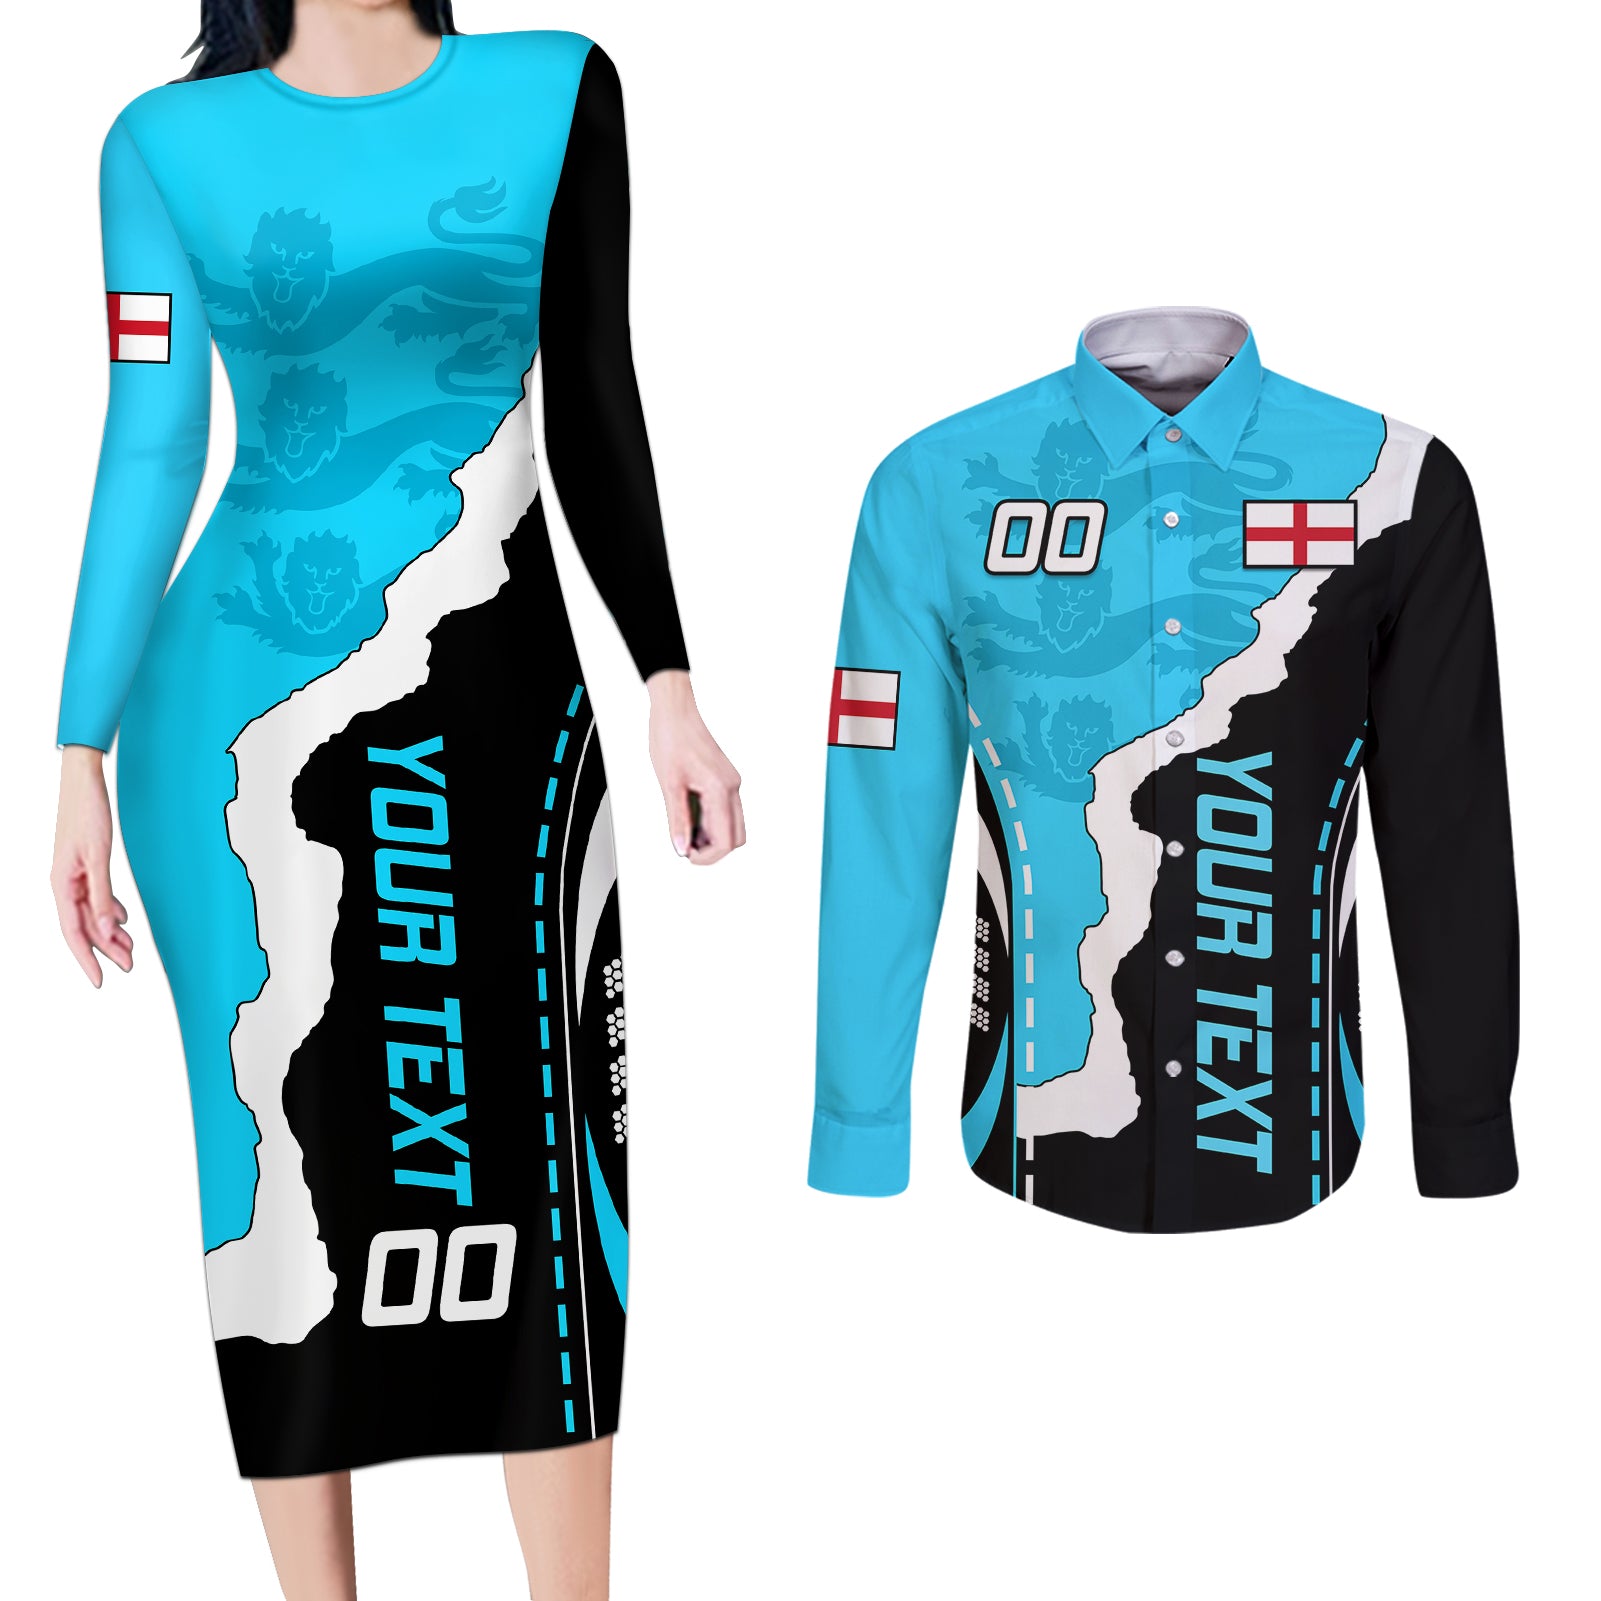 custom-england-couples-matching-long-sleeve-bodycon-dress-and-long-sleeve-button-shirts-the-three-lions-football-go-champions-blue